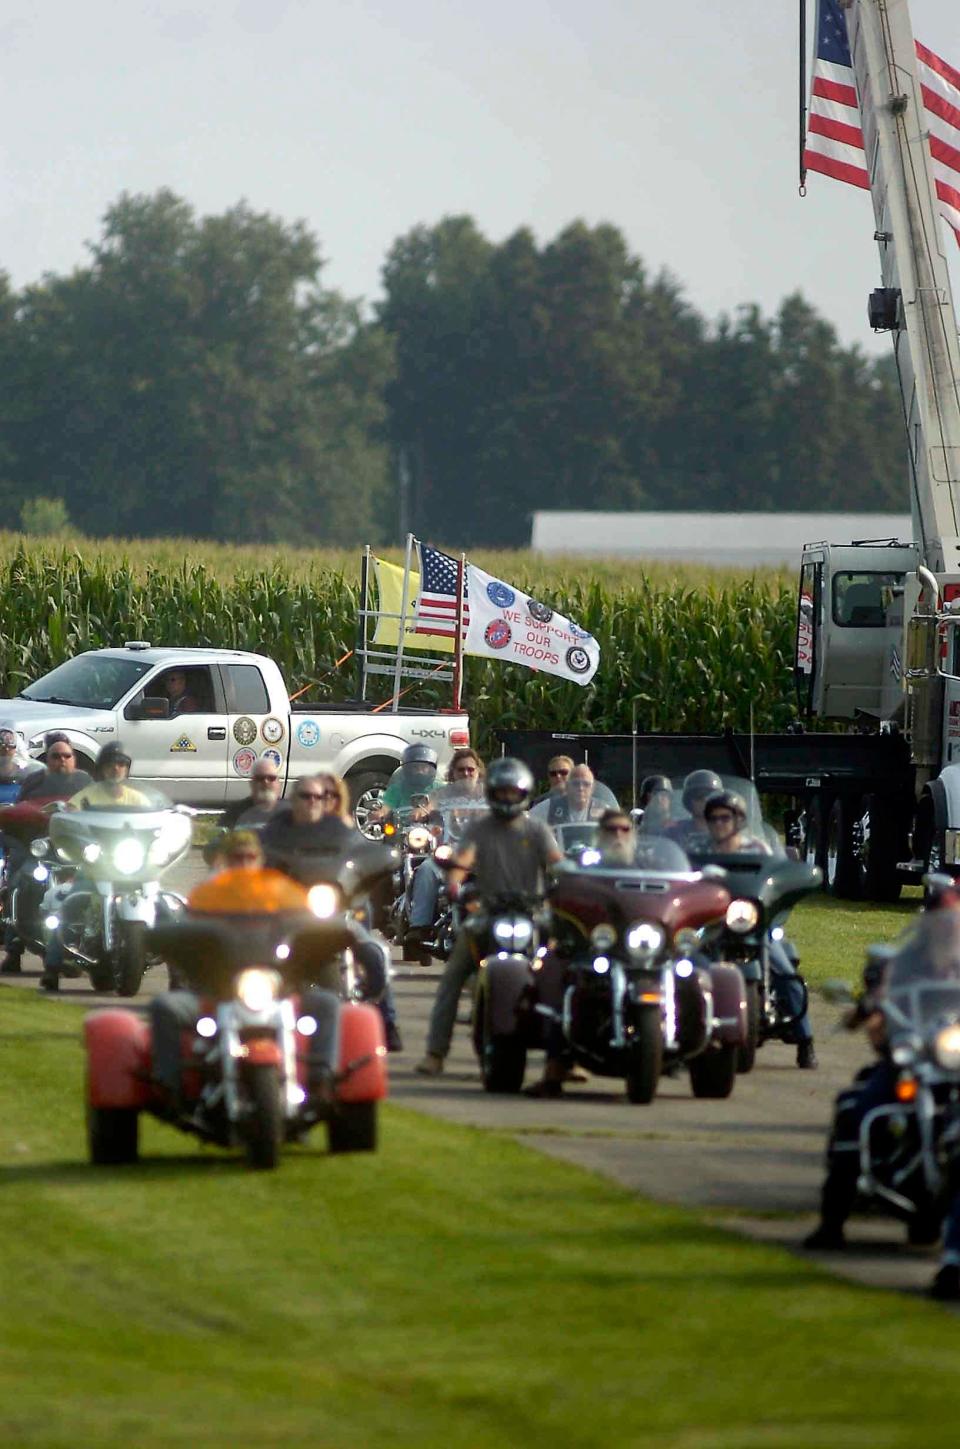 The American Veterans Travelling Tribute Vietnam Wall arrived at the Ashland County Airport Wednesday escorted by a caravan of 116 vehicles. Cyclists were part of the motorcade including law enforcement vehicles greeting well-wishers along the route.